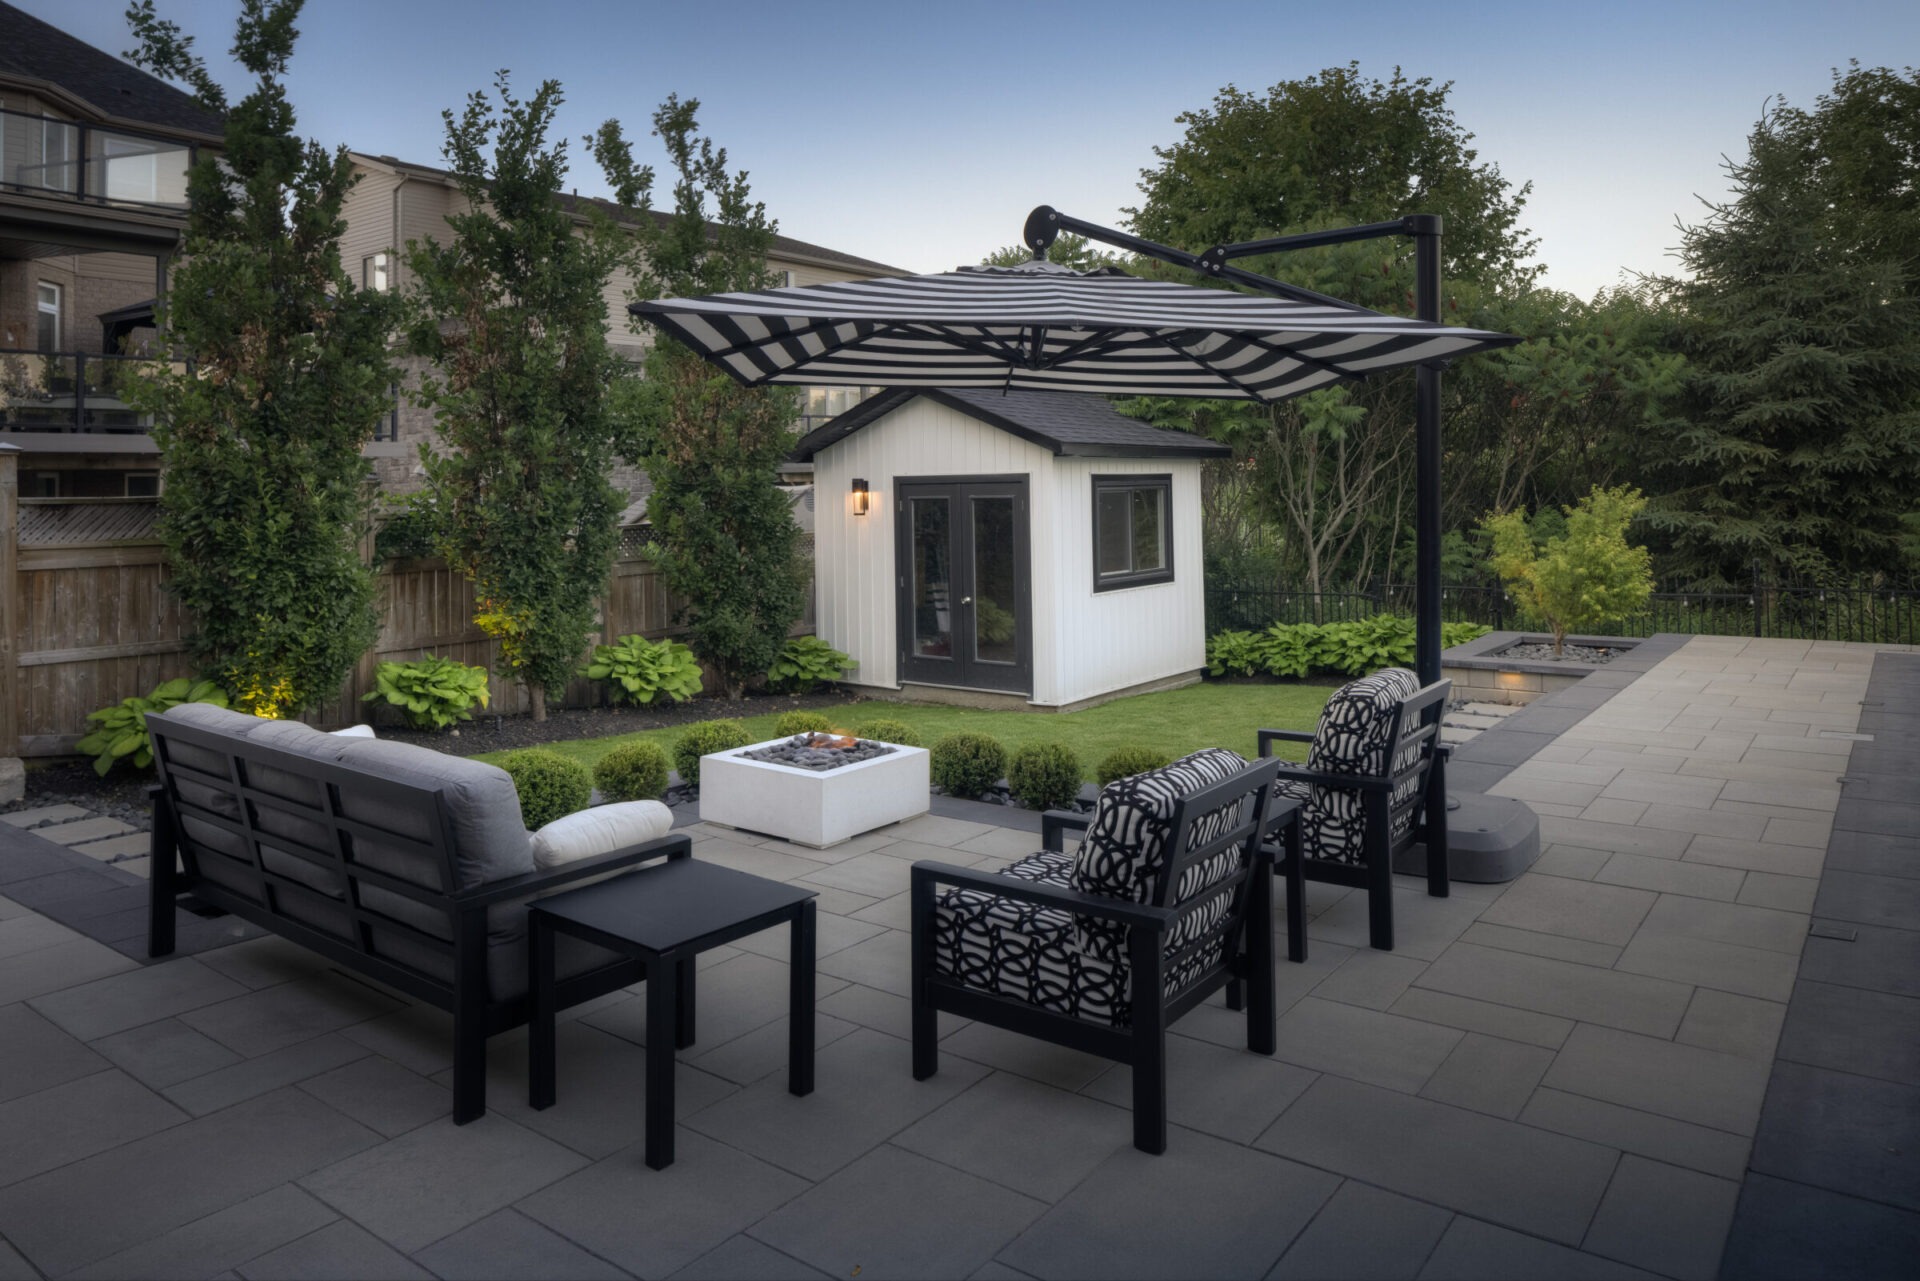 This image features a modern outdoor patio with sleek furniture, a fire pit, a pergola, manicured landscaping, and a small white structure in the background.